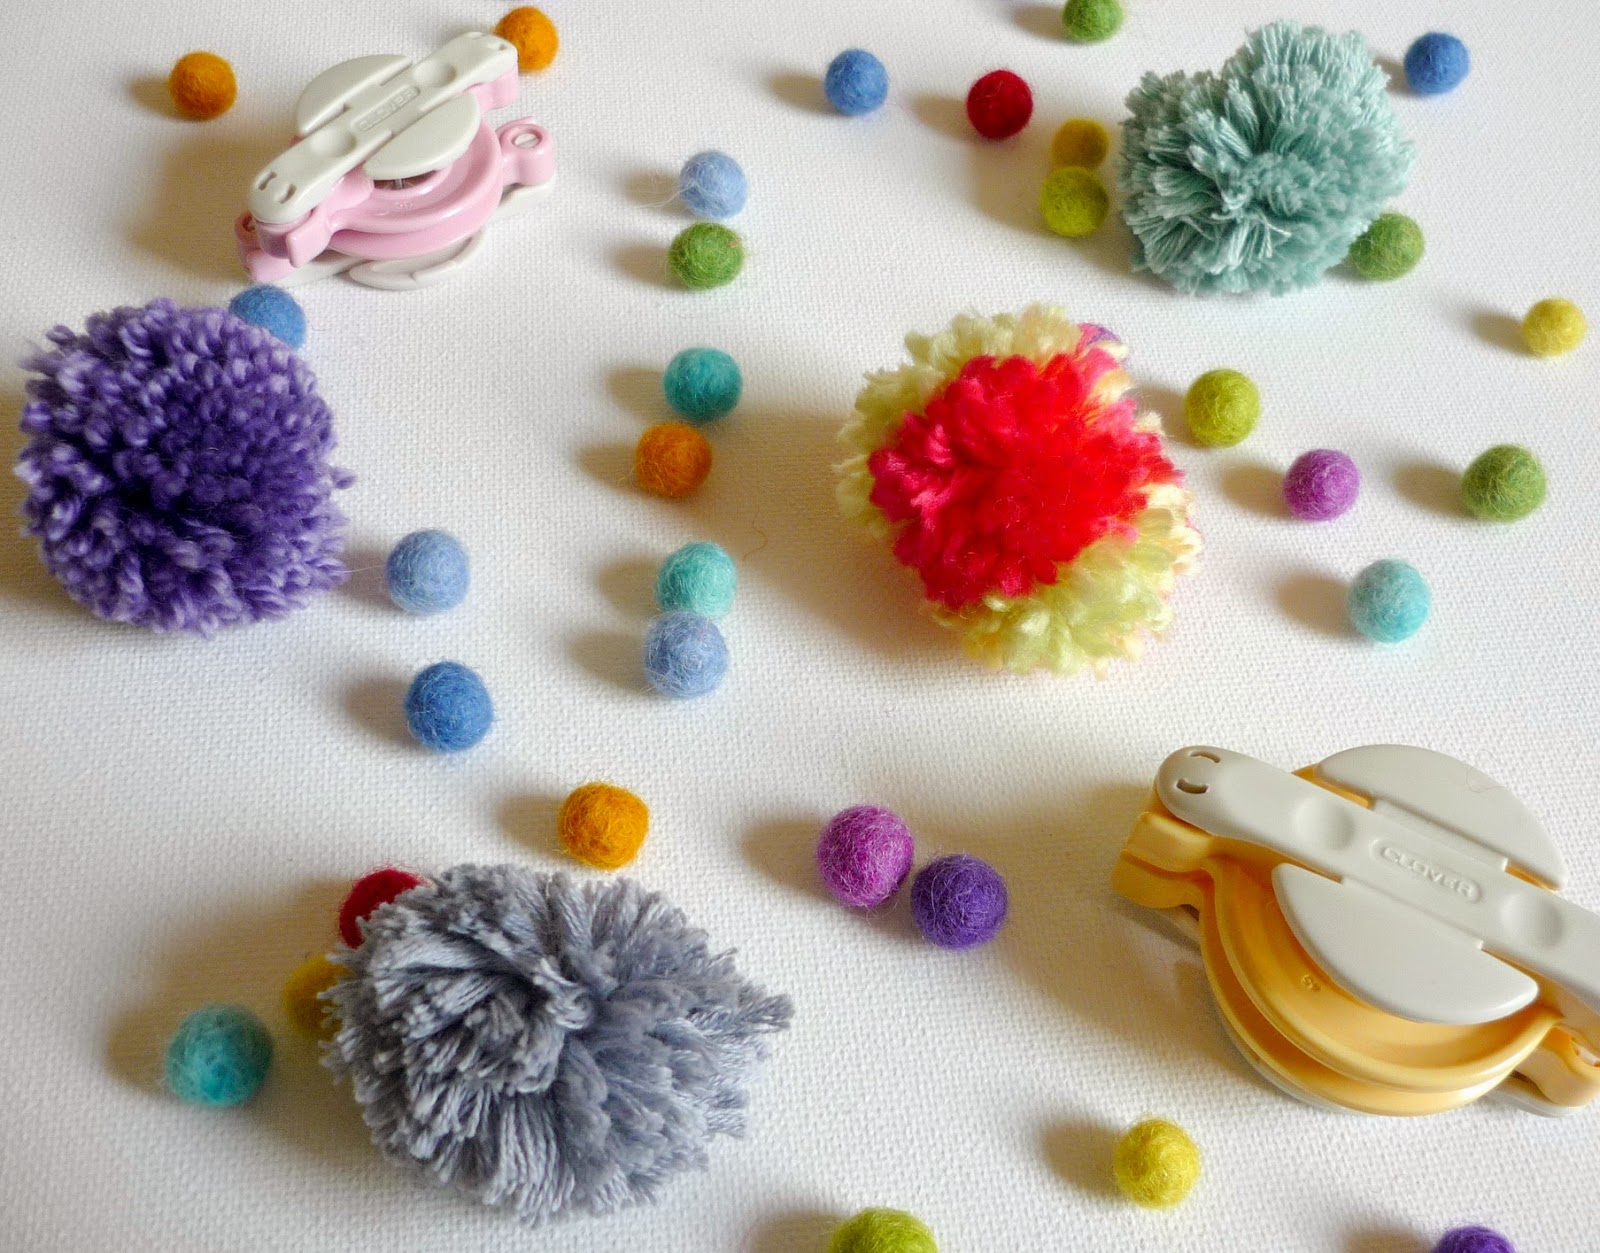 Abso-knitting-lutely!: How to Use a Clover Pompom Maker: Step-By-Step Photo  Guide